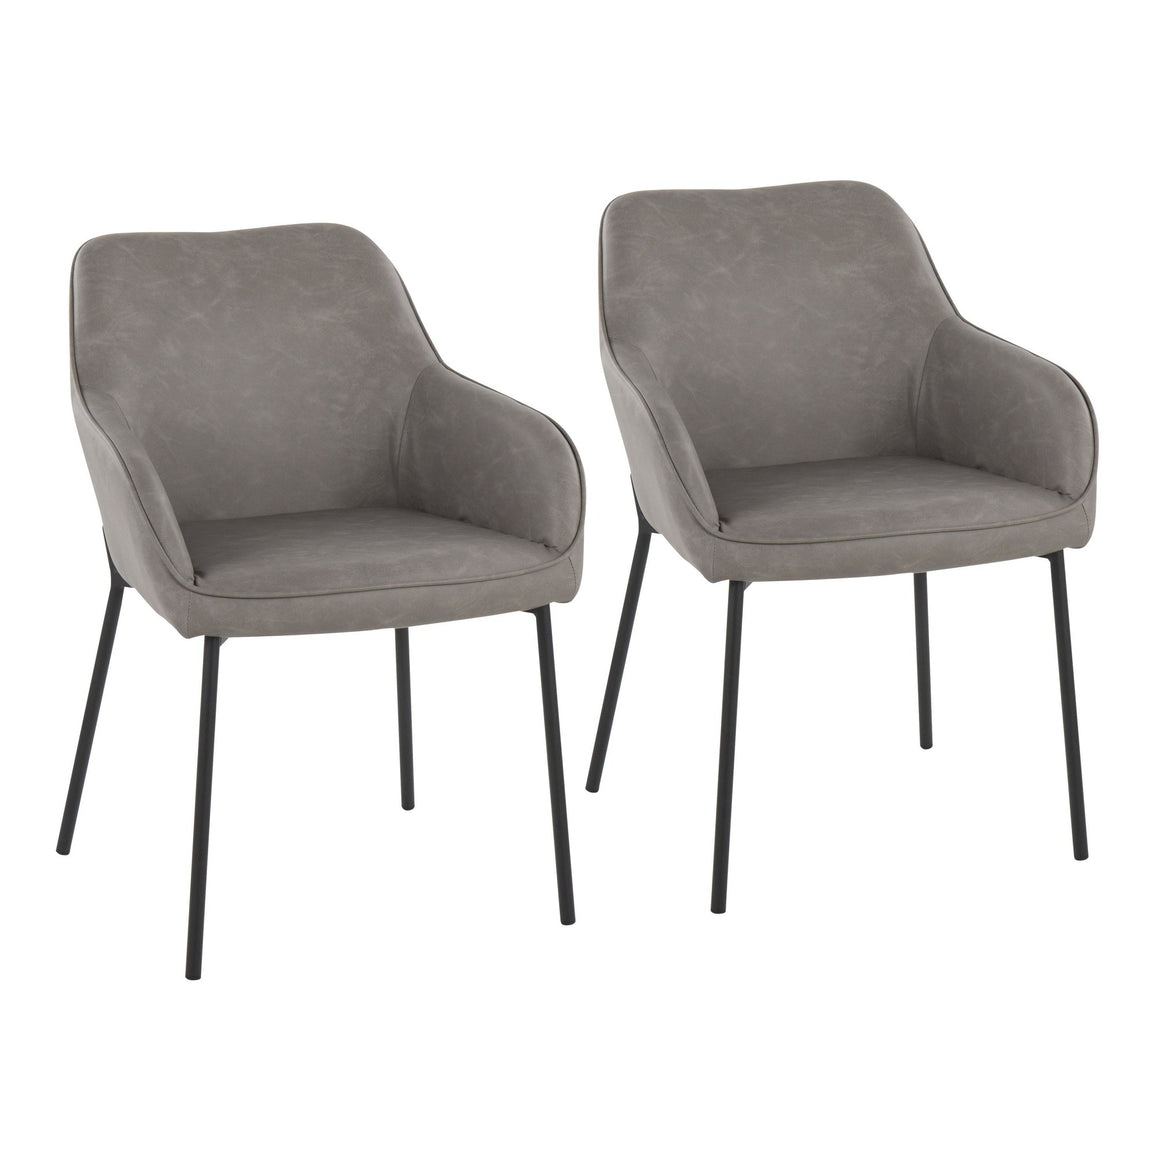 Daniella Contemporary Dining Chair in Black Steel and Grey Faux Leather by LumiSource - Set of 2